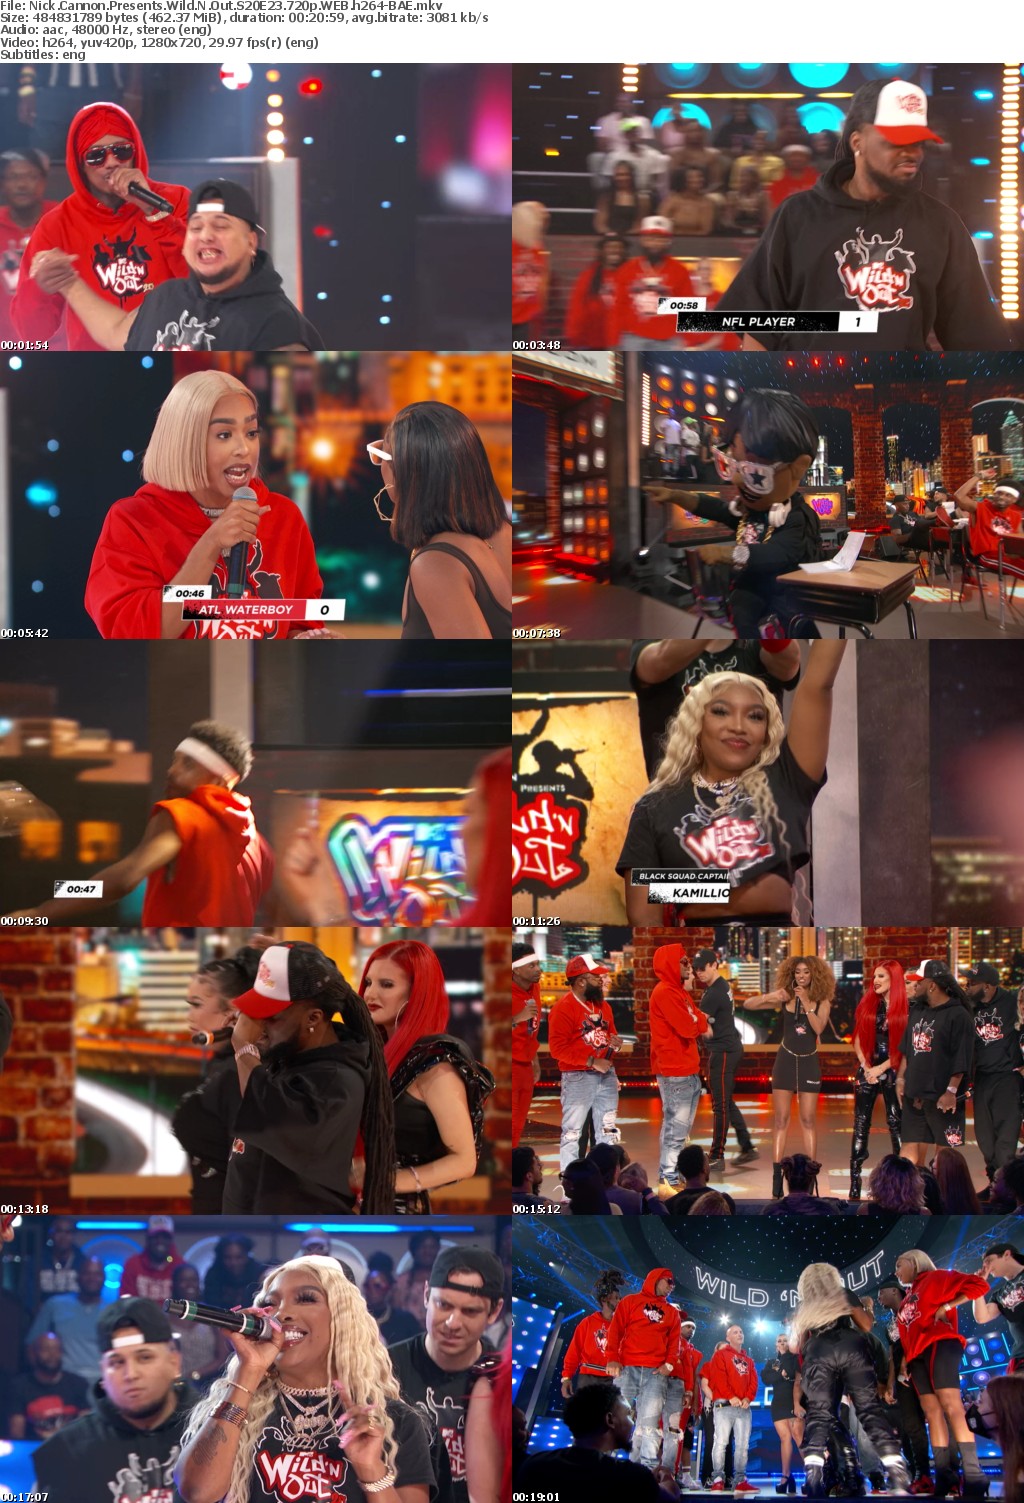 Nick Cannon Presents Wild N Out S20E23 720p WEB h264-BAE